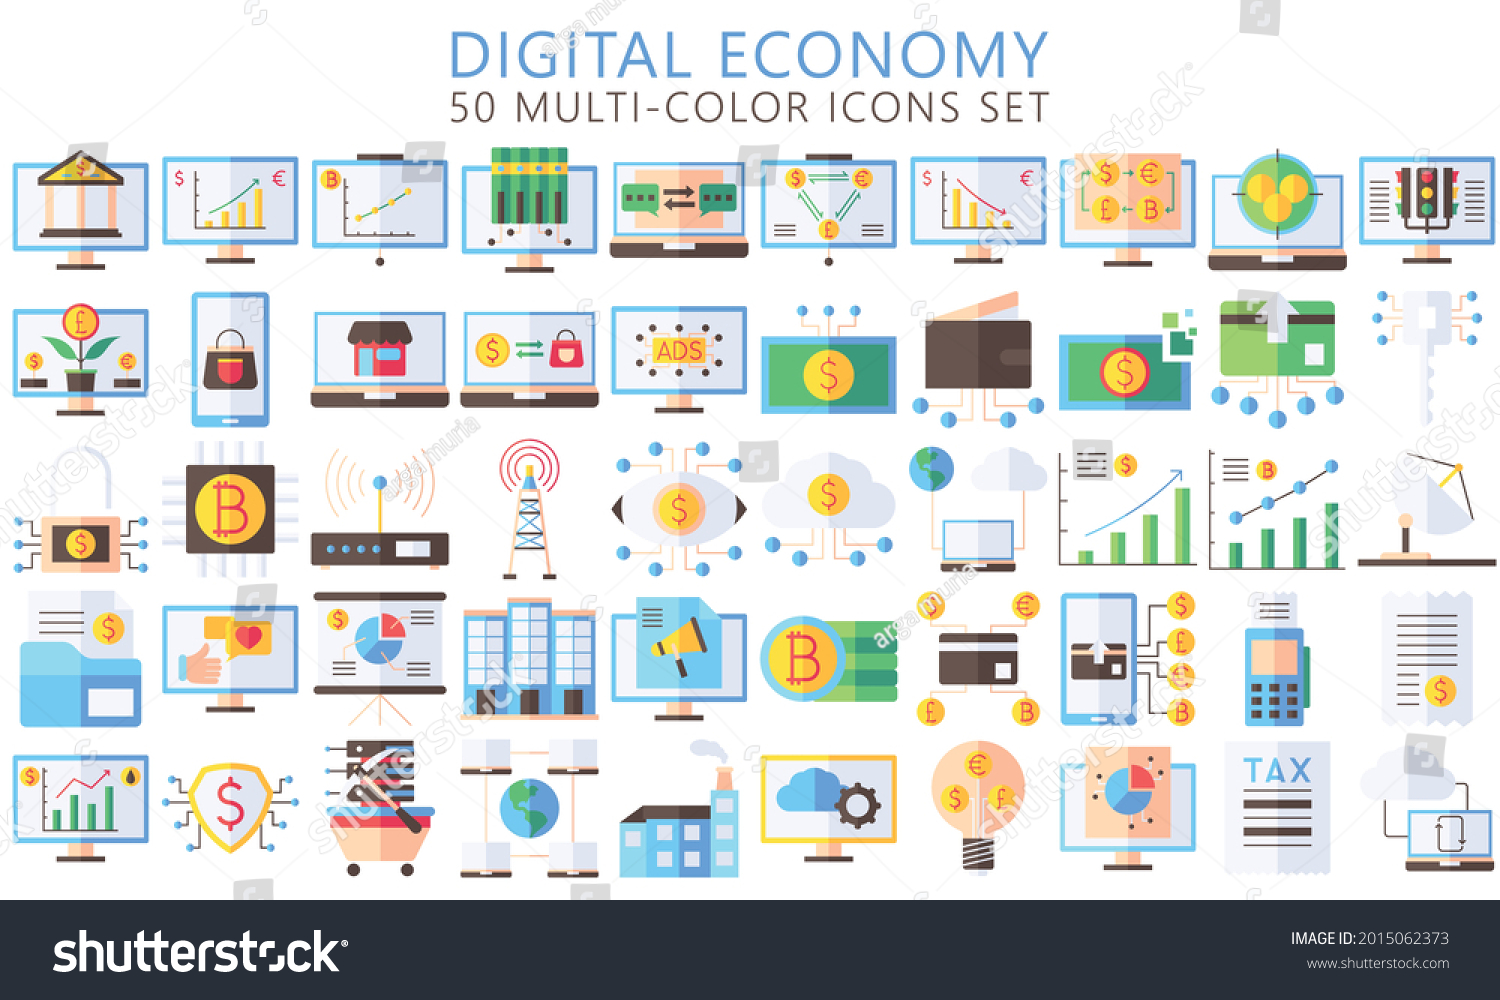 SVG of Digital Economy multi-color icons set, contain such as computer, crypto currency, diagram, finance symbol, Used for modern concepts, web, UI or UX kit and applications. EPS 10 ready convert to SVG svg